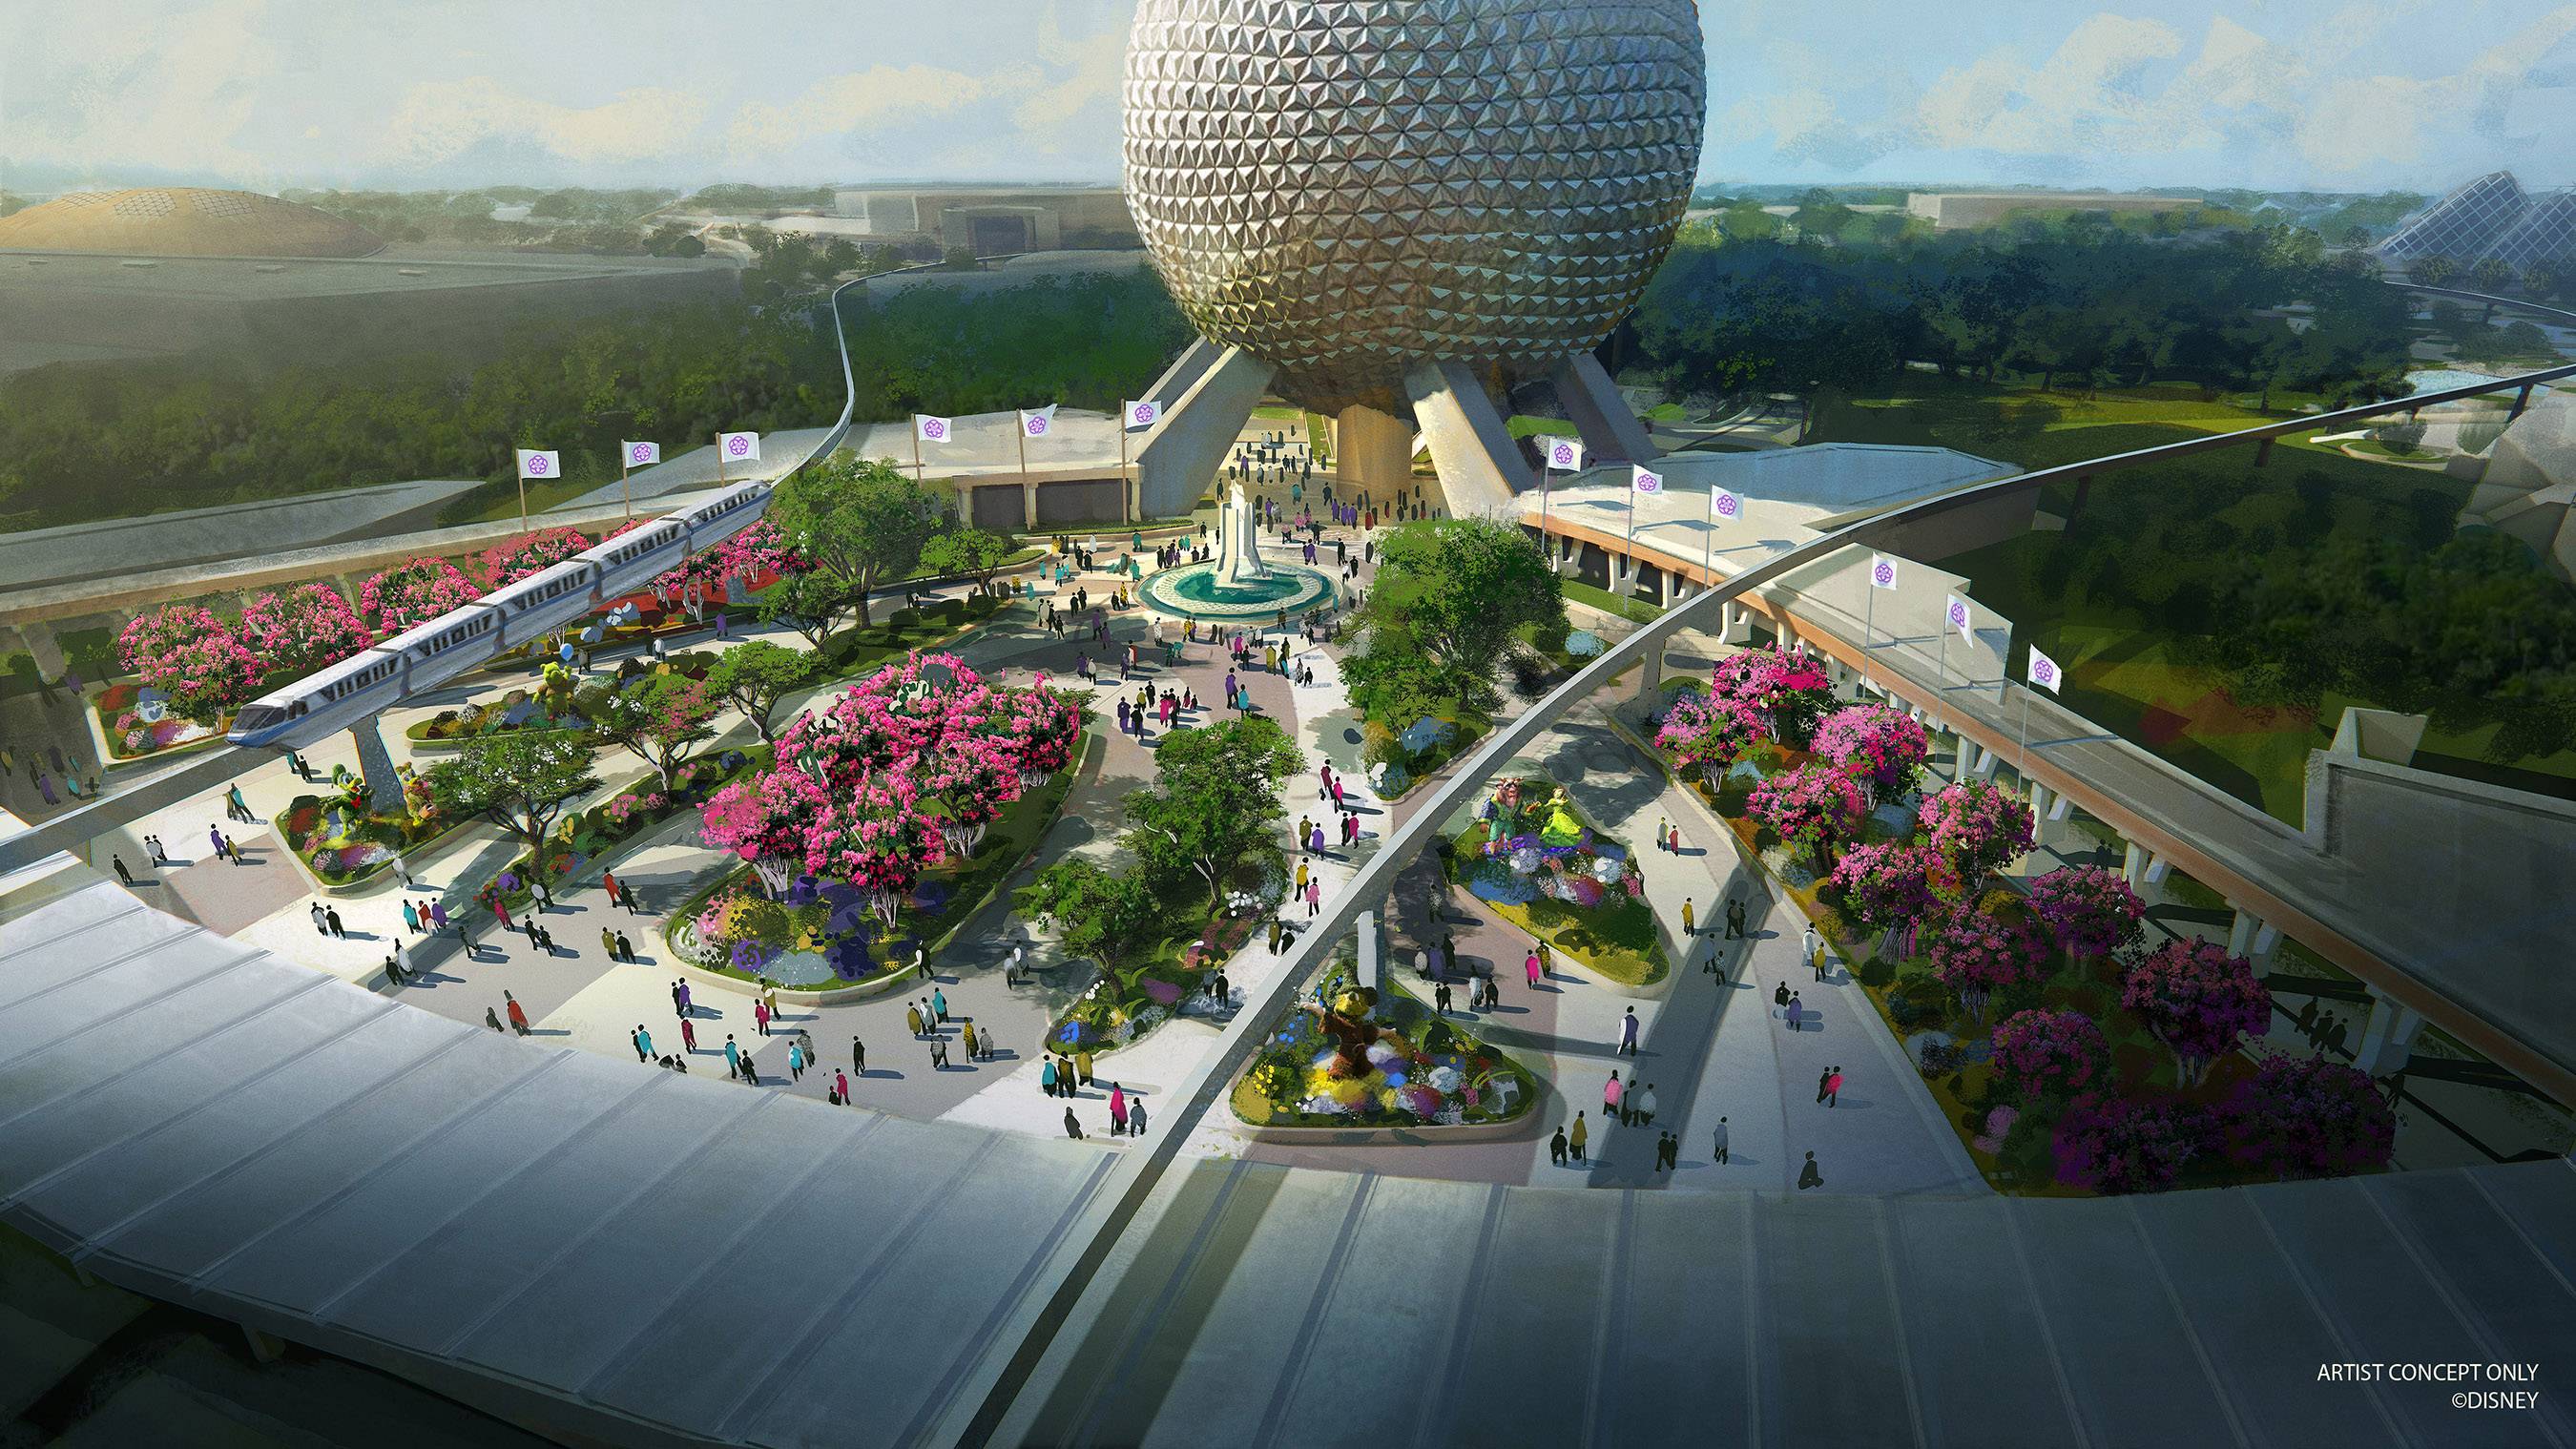 Permits filed to begin work on the new Epcot entrance